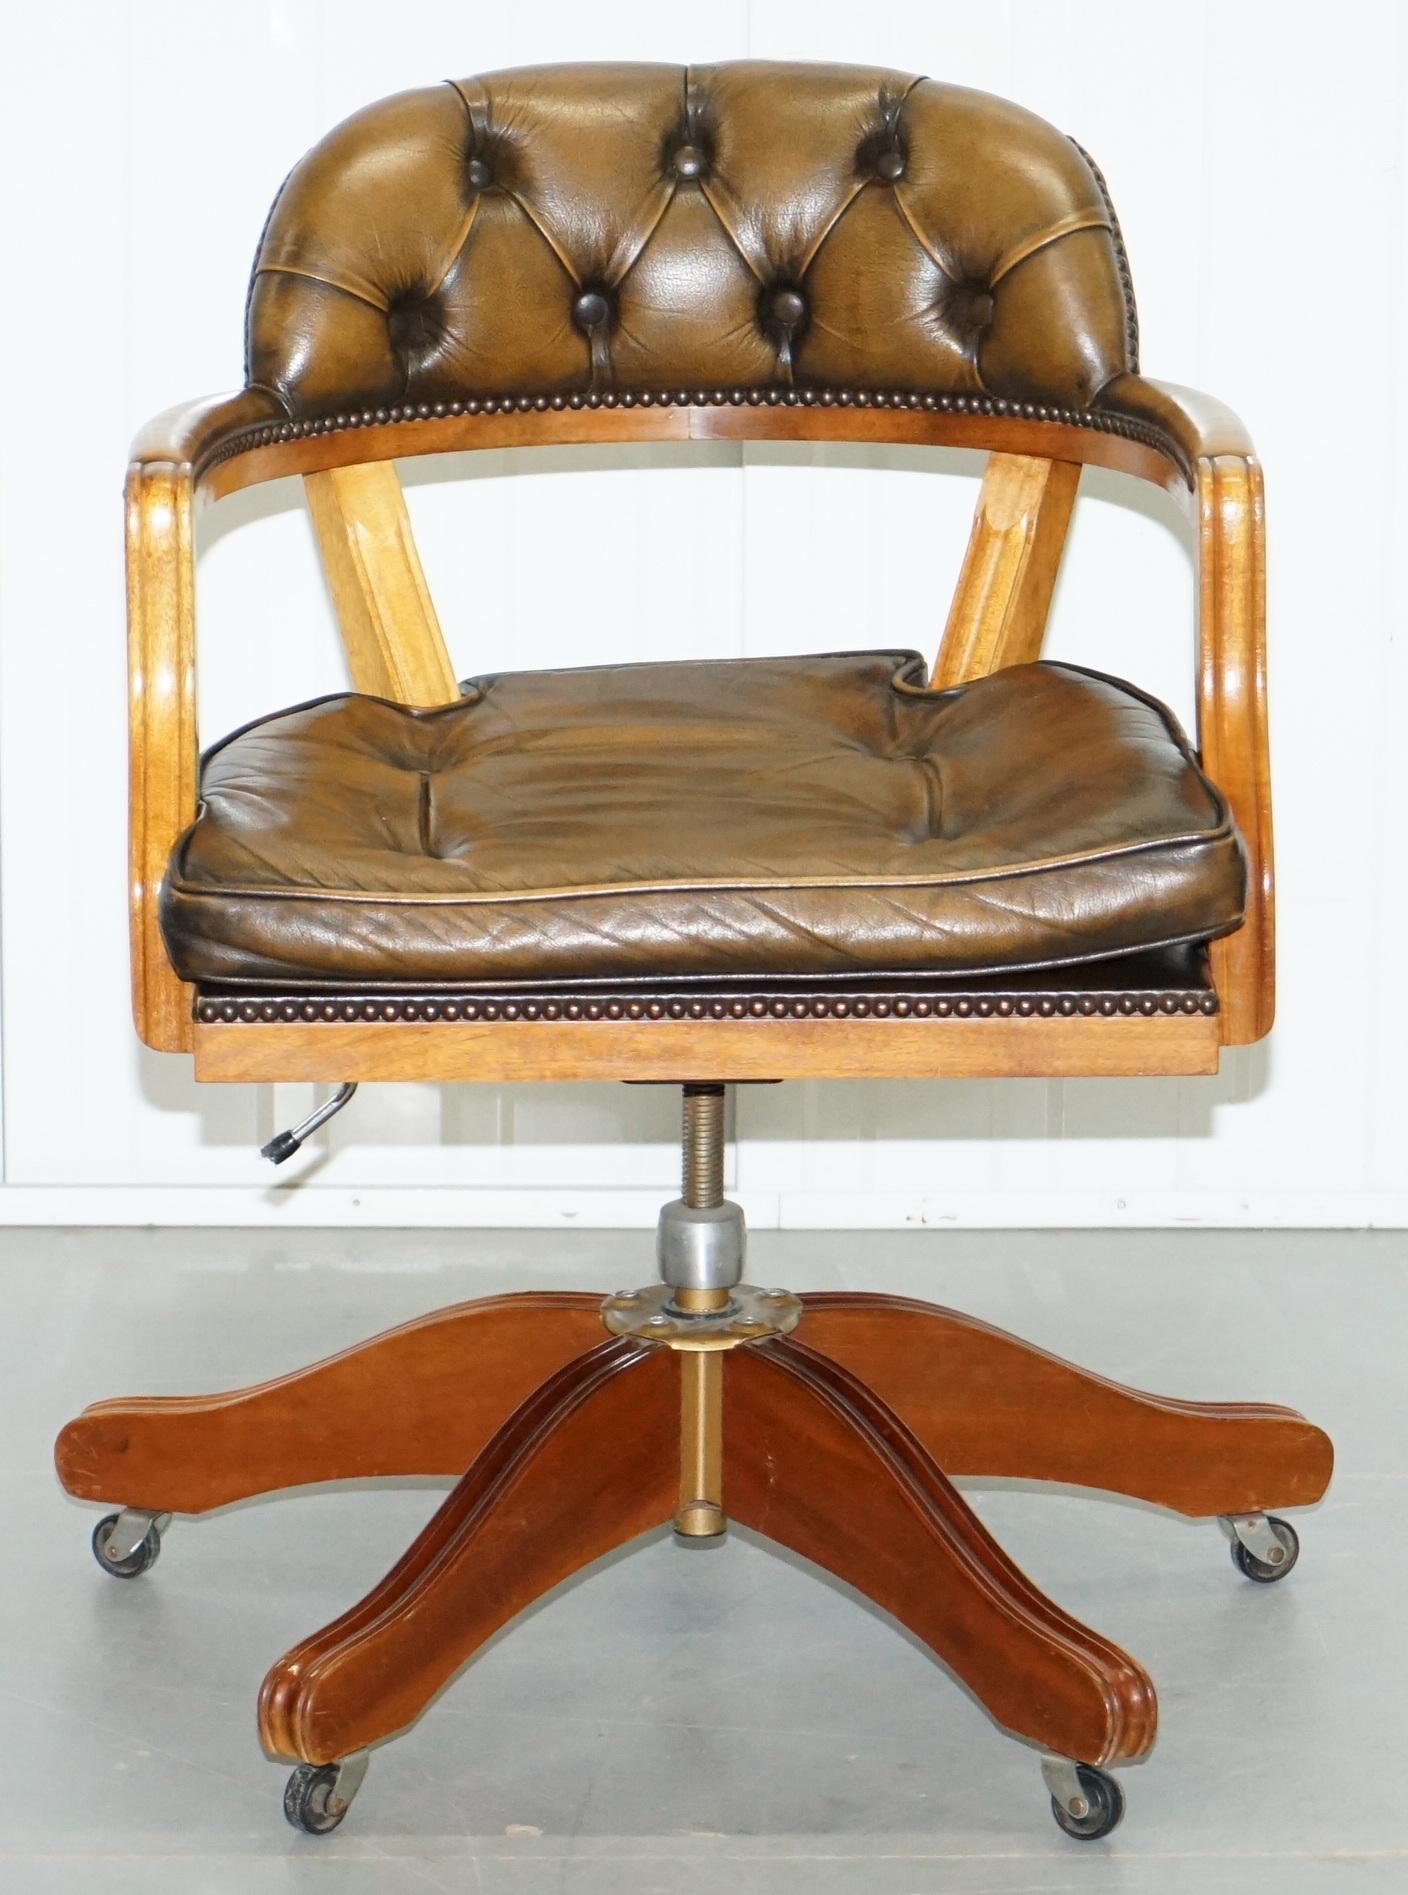 We are delighted to offer for sale this lovely aged brown leather Chesterfield Admirals court captain’s chair

These chairs are called court chairs because they little the British court system during the 1960s-1980s

This chair is in lightly